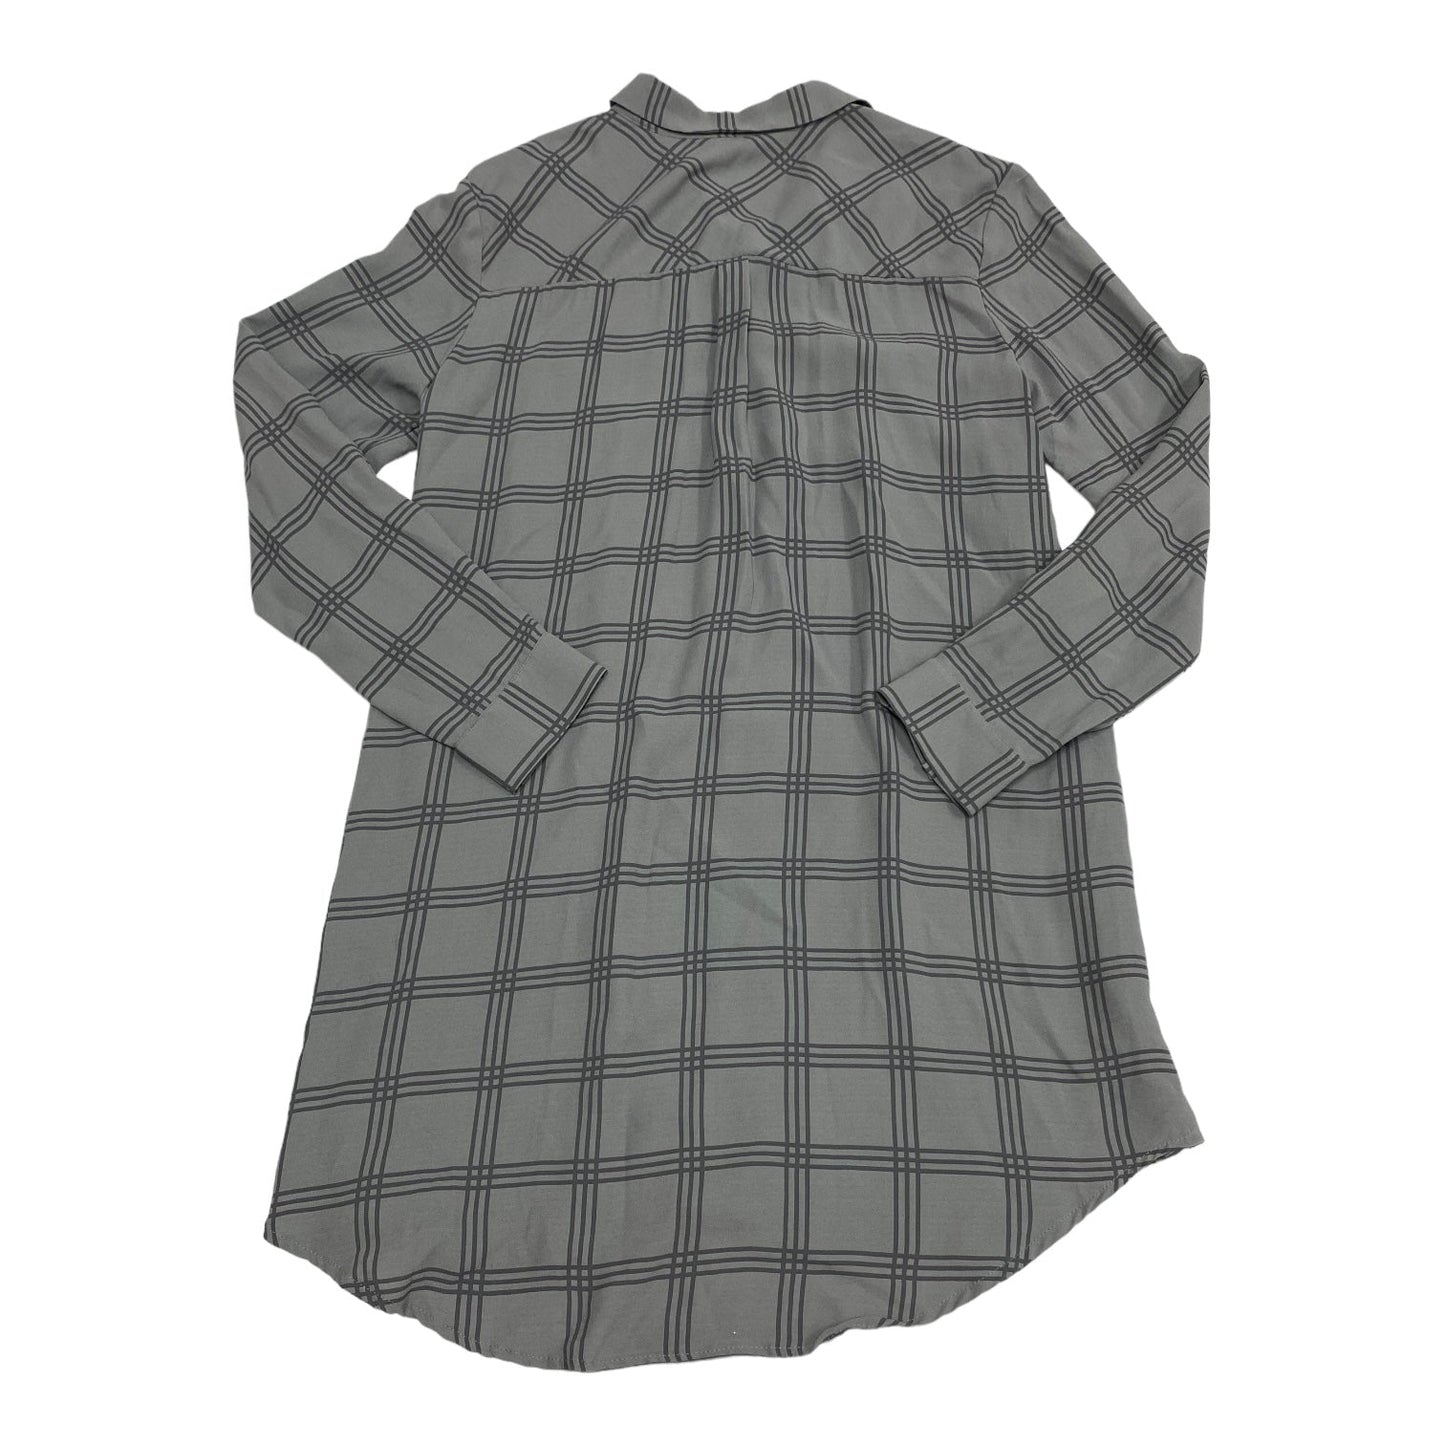 Plaid Silk Top Long Sleeve Eileen Fisher, Size Petite   Small